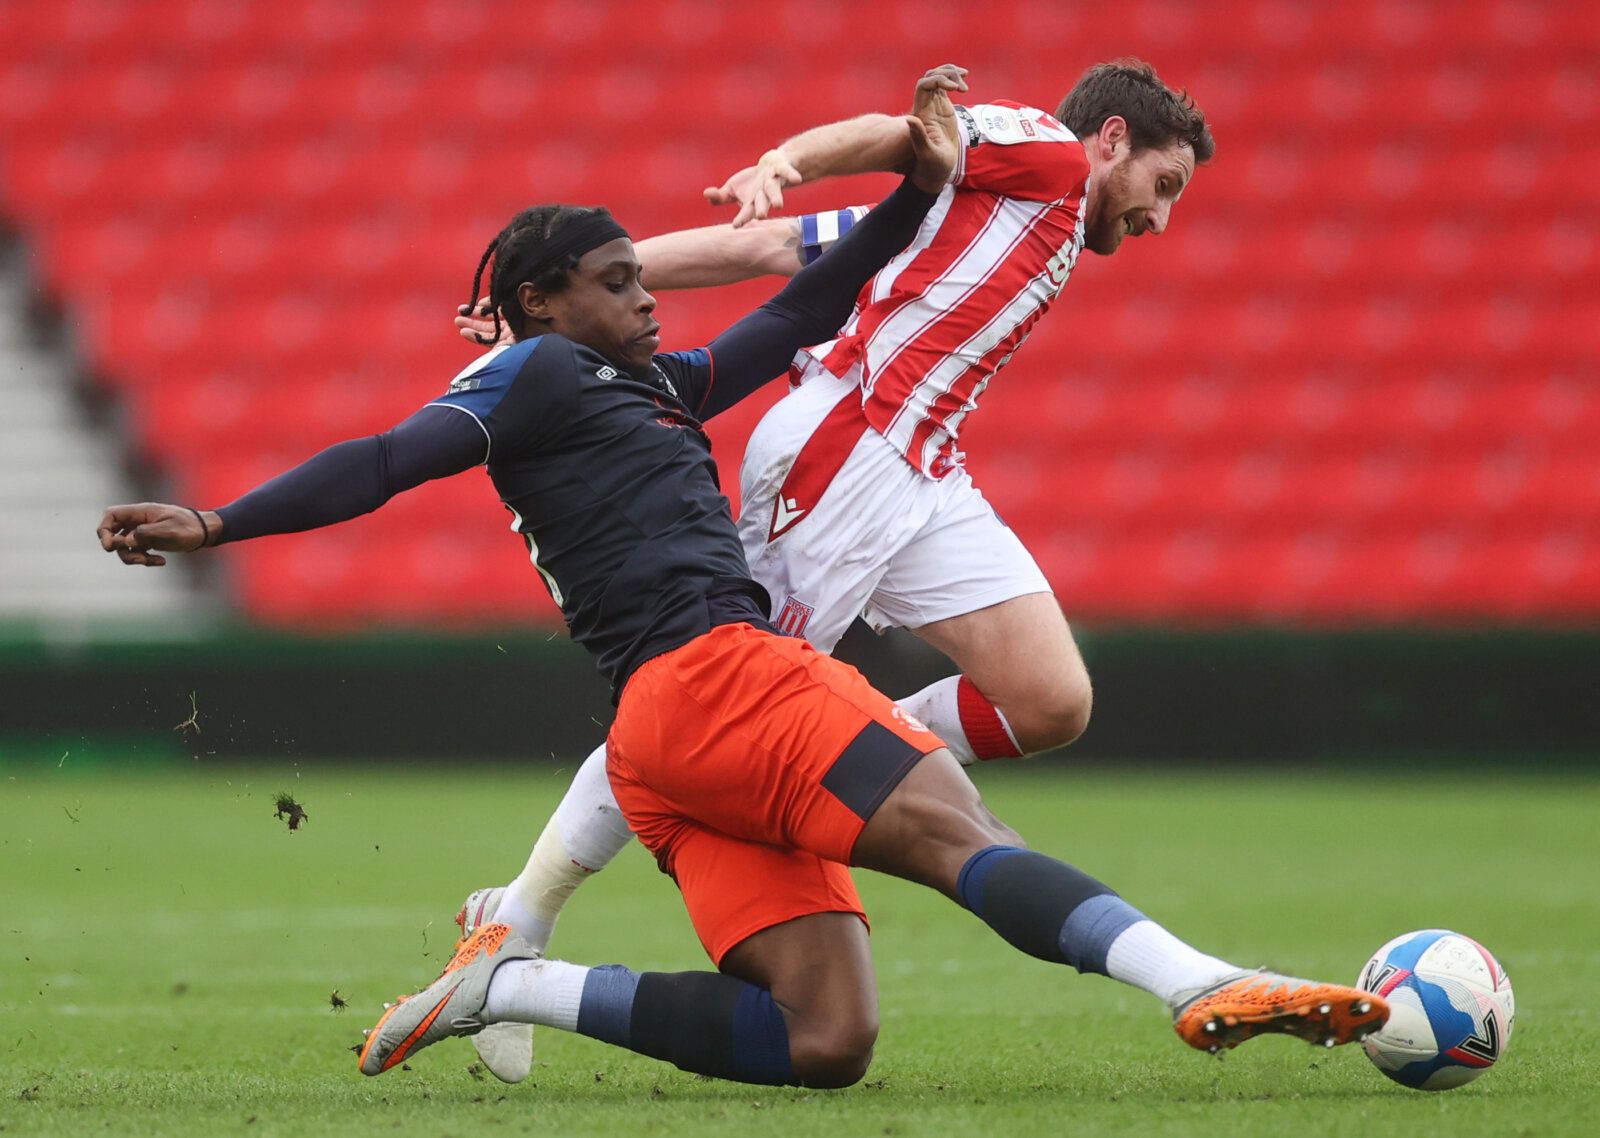 Soccer Football - Championship - Stoke City v Luton Town - bet365 Stadium, Stoke-on-Trent, Britain - February 20, 2021 Stoke City's Joe Allen in action with Luton Town's Pelly Ruddock Action Images/Carl Recine EDITORIAL USE ONLY. No use with unauthorized audio, video, data, fixture lists, club/league logos or 'live' services. Online in-match use limited to 75 images, no video emulation. No use in betting, games or single club /league/player publications.  Please contact your account representati